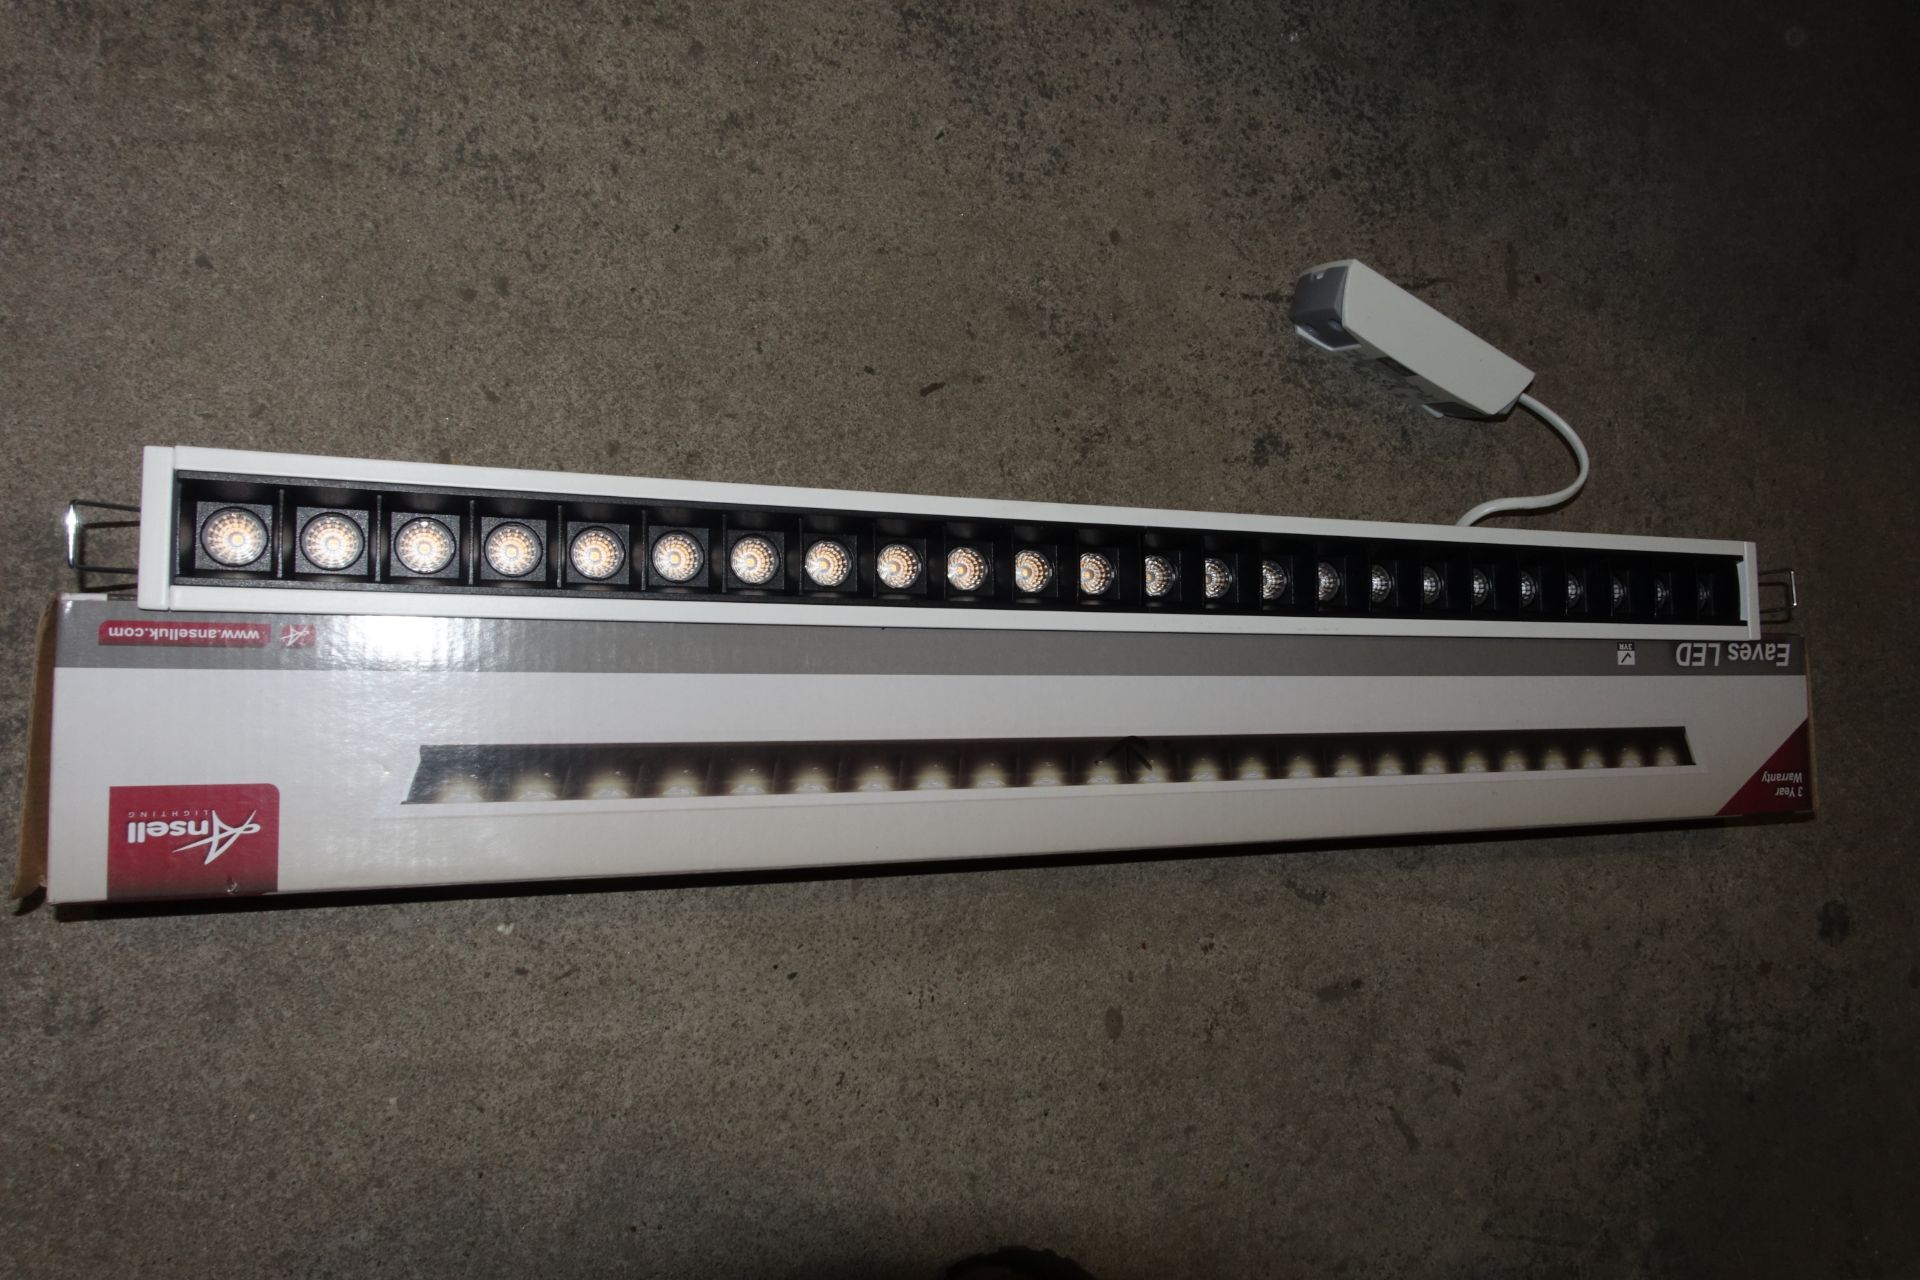 20 x ANSELL AEAVLED600/WB/CW 15W LED Recessed Linears 600mm 400K White